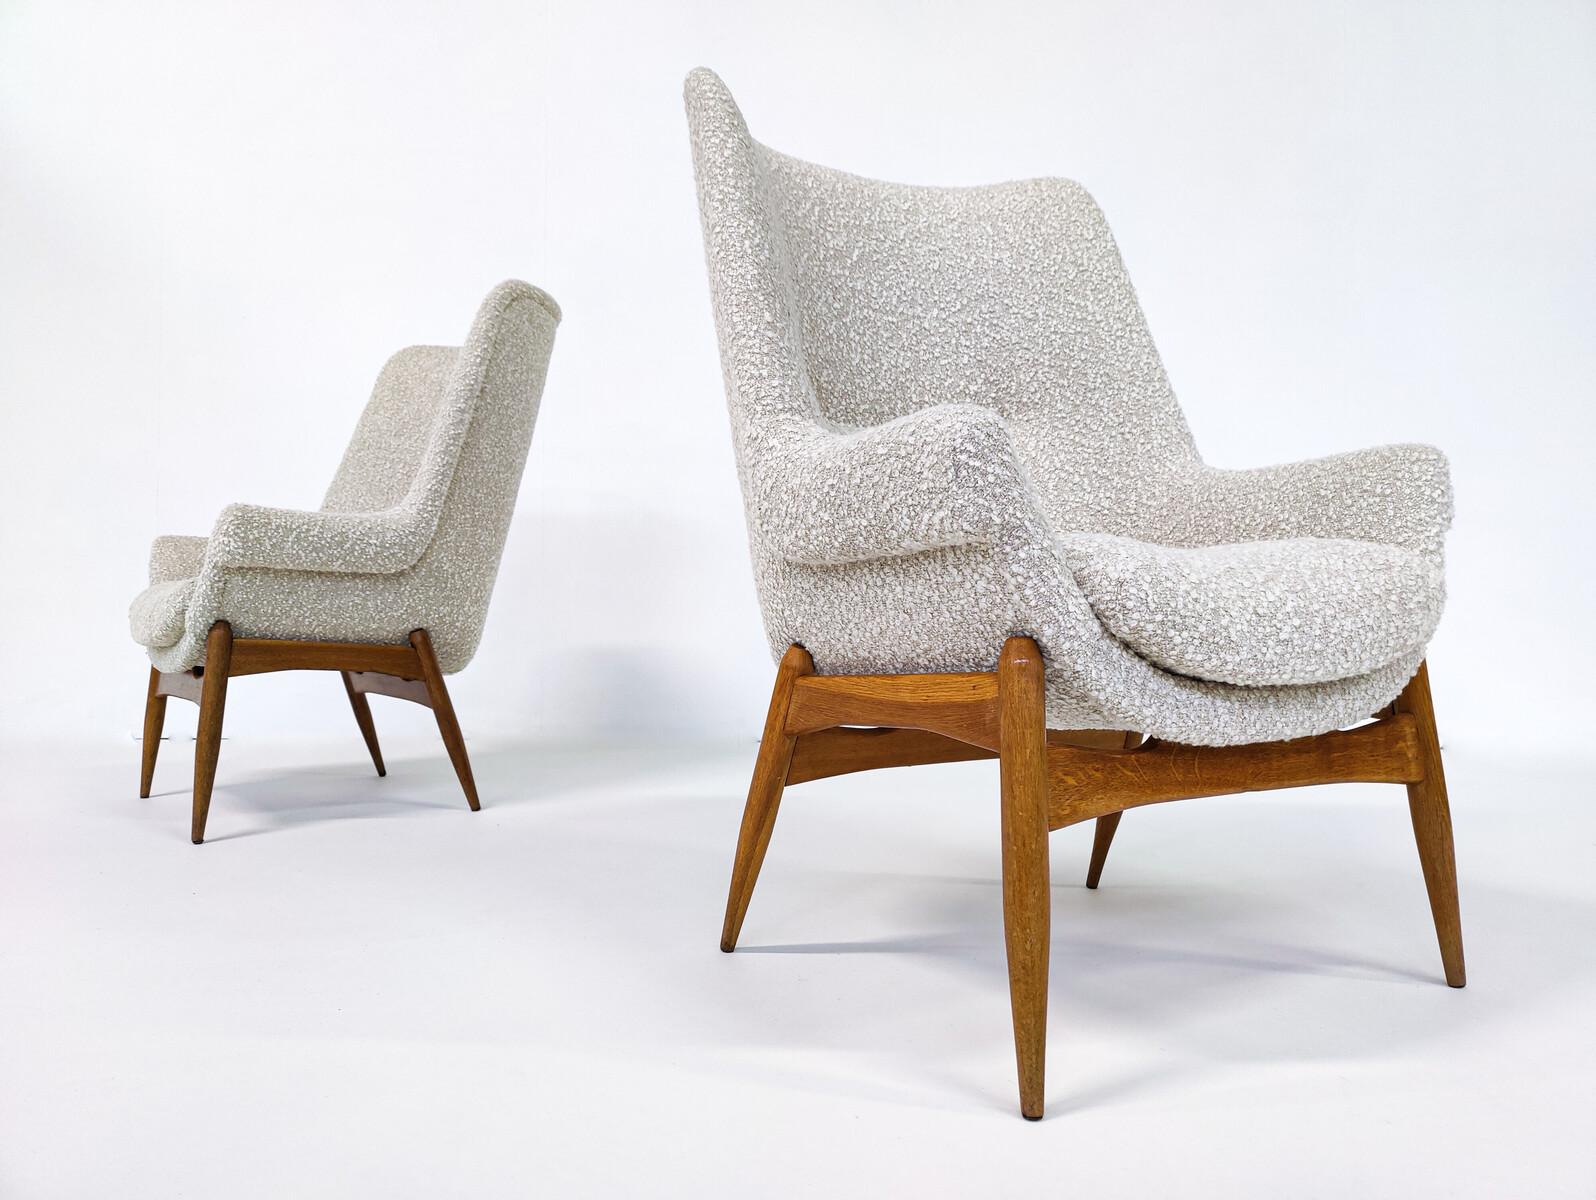 Hungarian Pair of Mid-Century Modern Beige Fabric Armchairs by Julia Gaubek, Hungary, 1950 For Sale